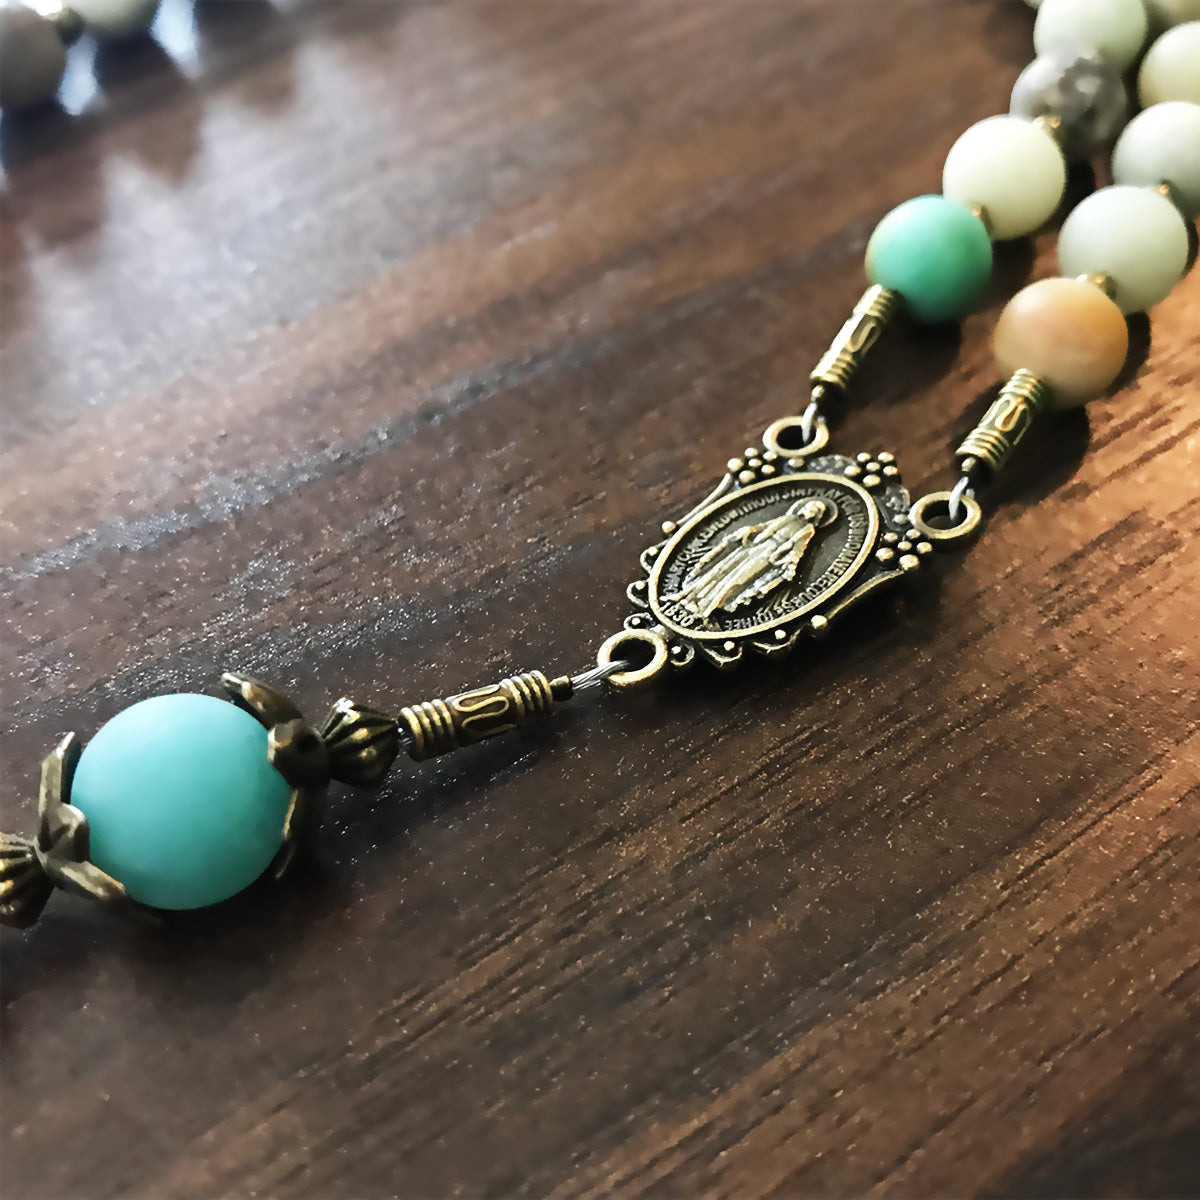 Amazonite Stone Rosary With Miraculous Medal by Catholic Heirlooms - Confirmation - Holy Communion Gift - Rosary Necklace